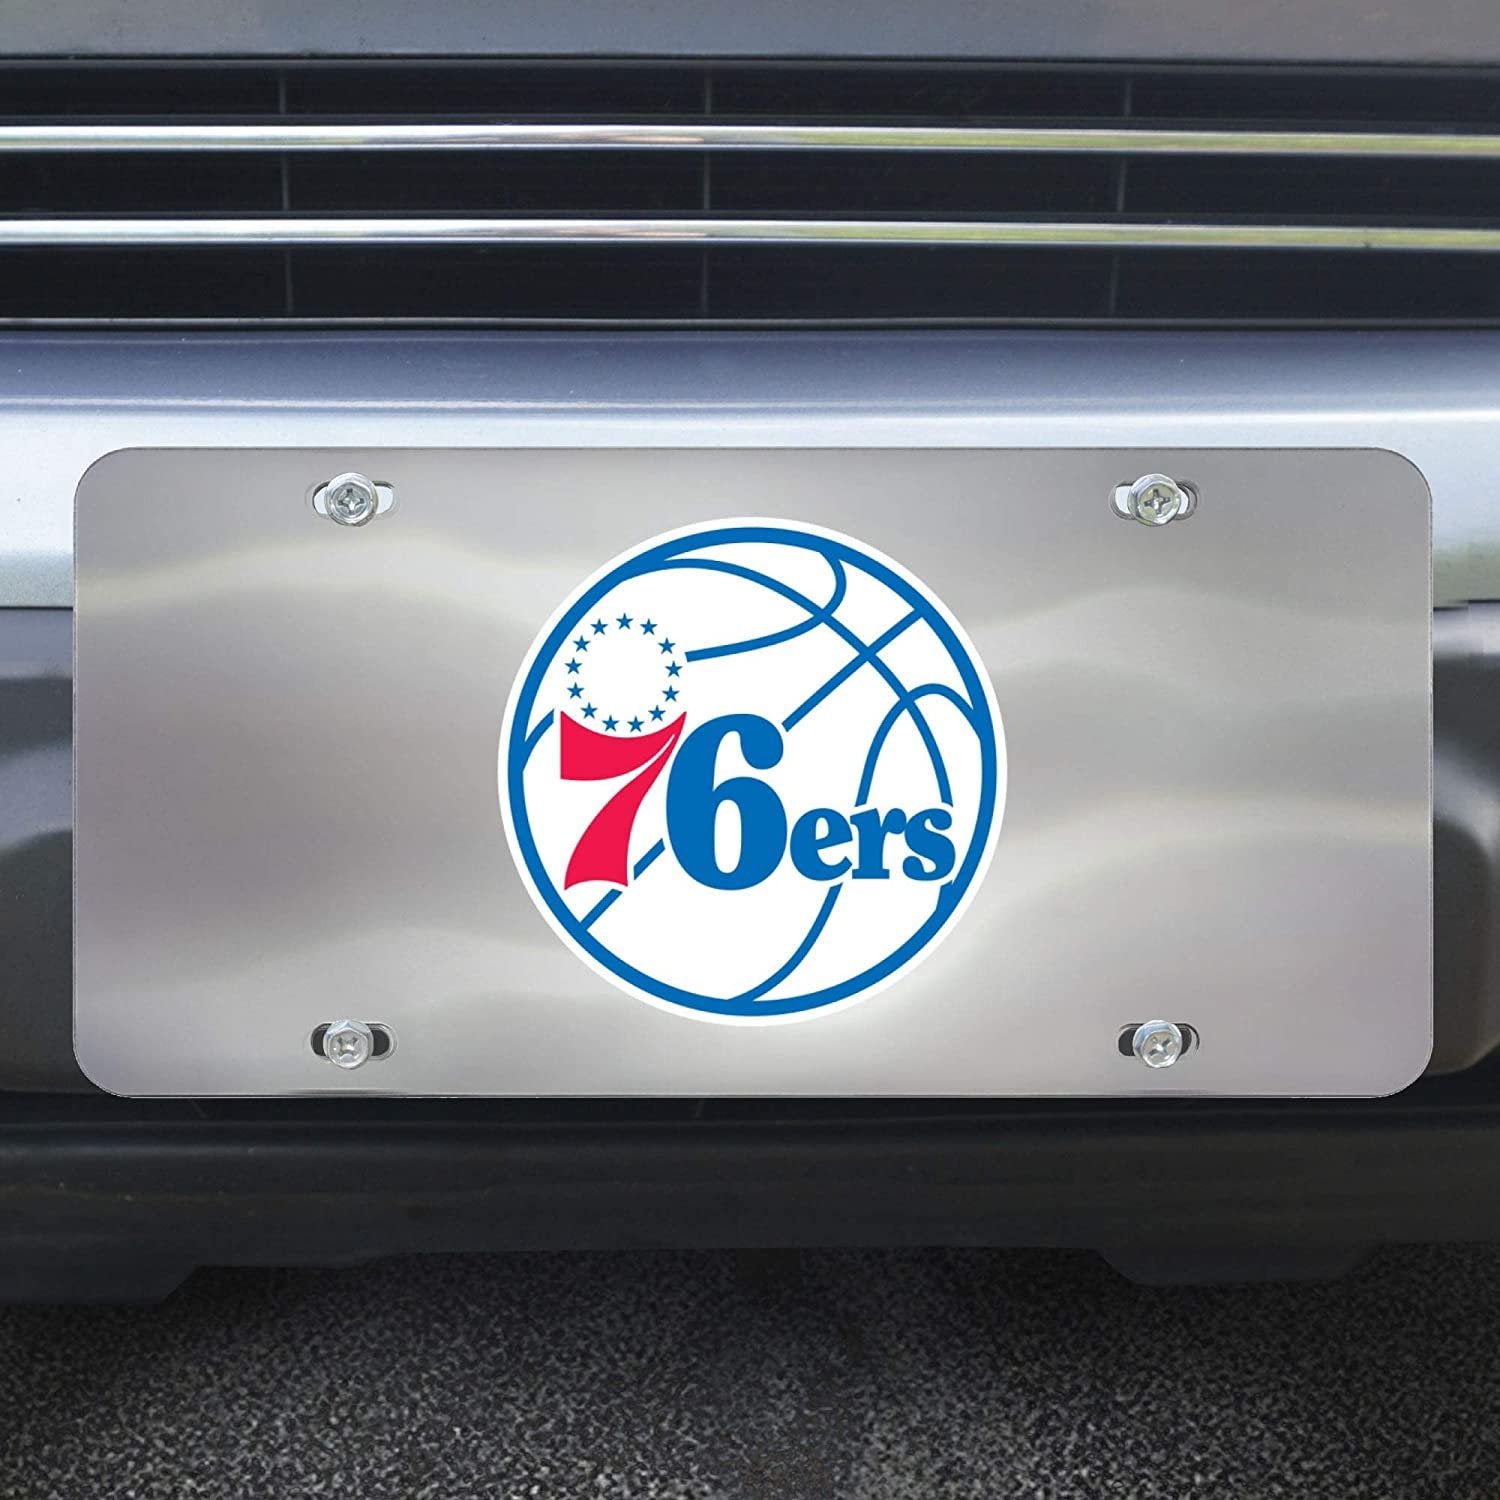 Philadelphia 76ers License Plate Tag, Premium Stainless Steel Diecast, Chrome, Raised Solid Metal Color Emblem, 6x12 Inch